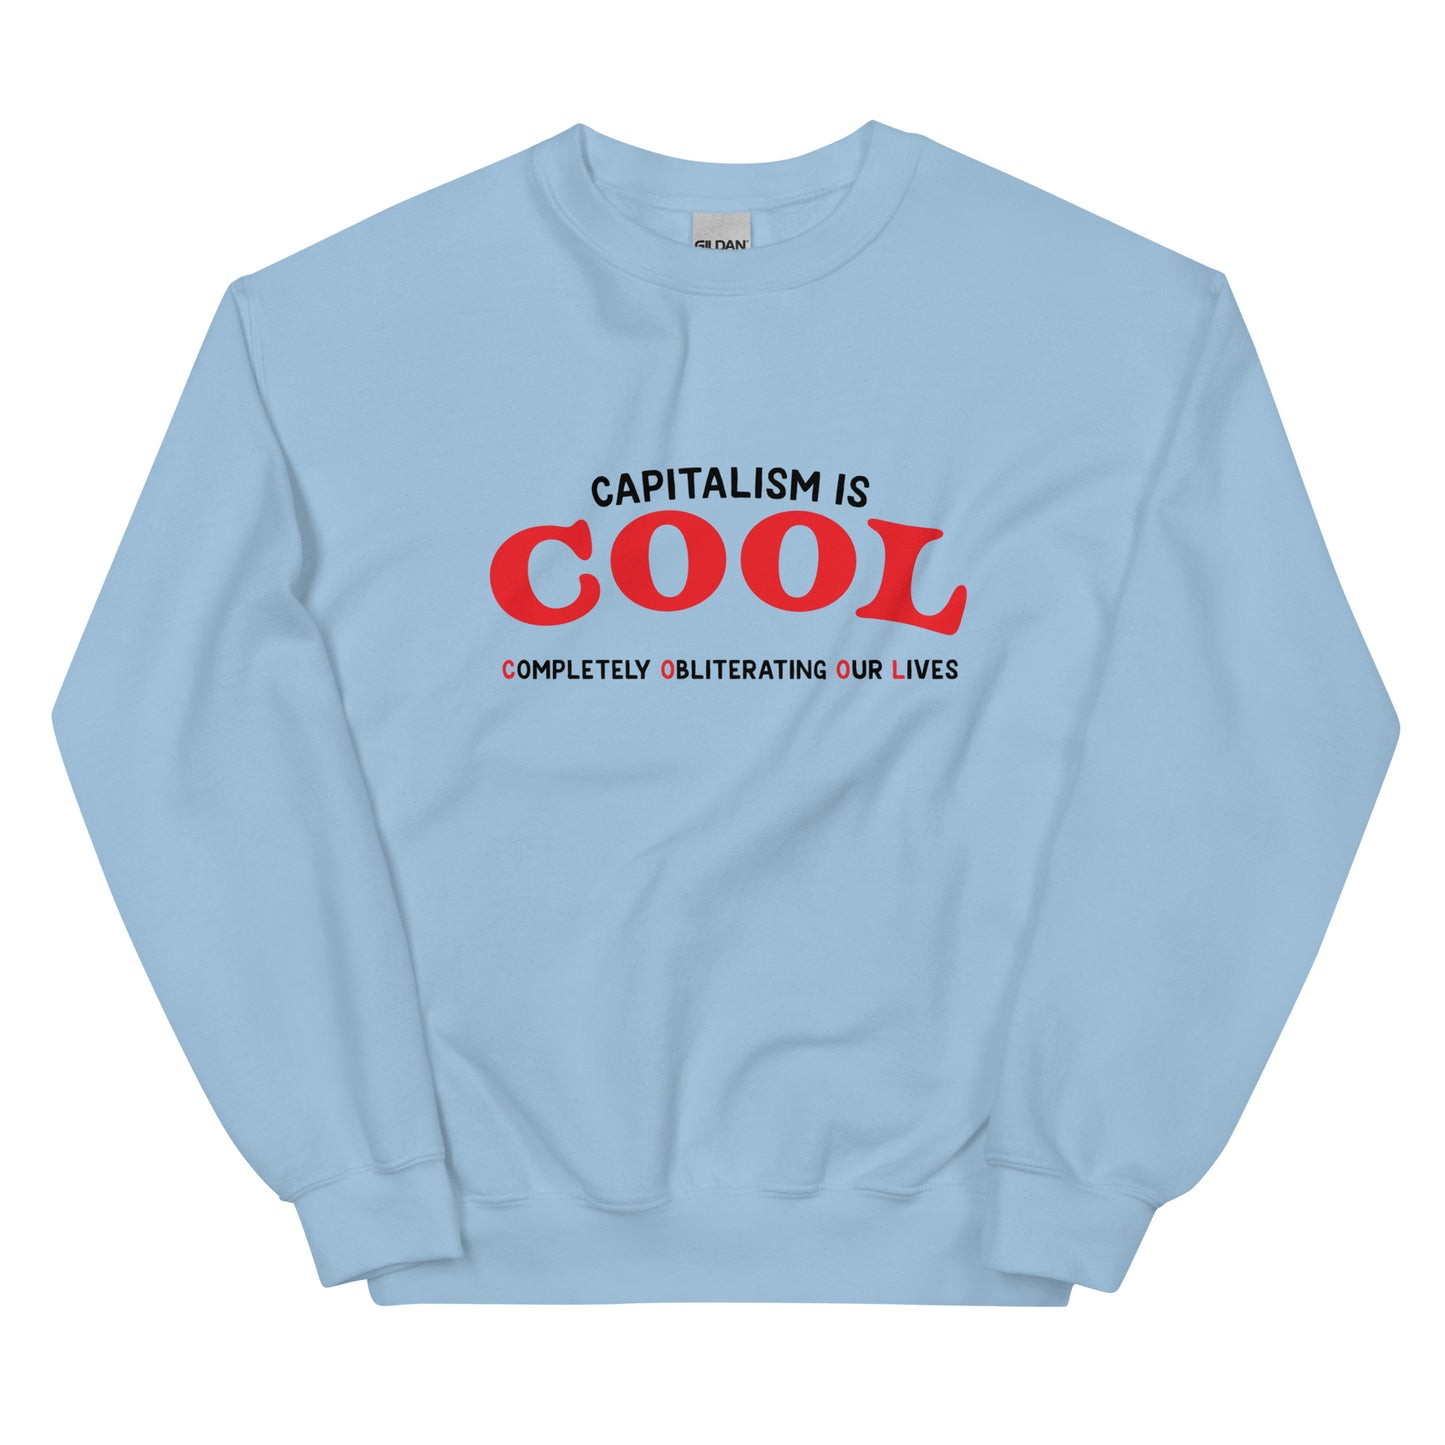 Capitalism is Cool (Completely Obliterating Our Lives) Unisex Sweatshirt